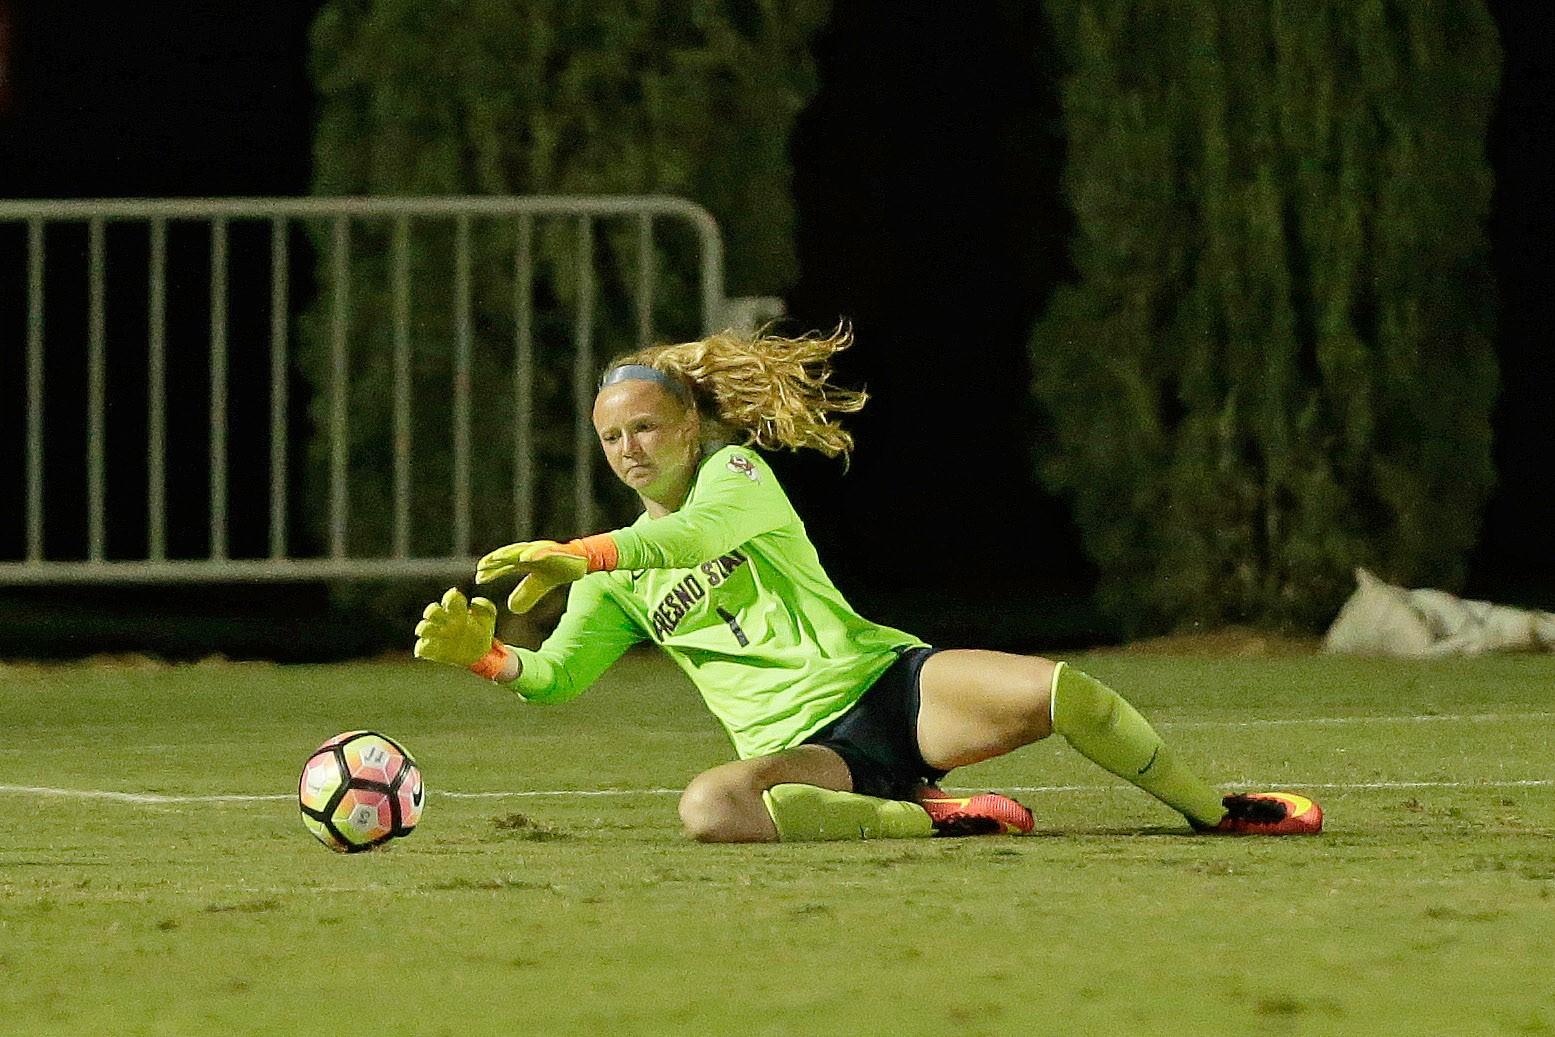 Fresno+State+womens+soccer+goalie+Marie+Berwinkel-Kottman+saves+a+ball+from+going+into+the+back+of+the+net.+%28Courtesy+of+Fresno+State+Athletics%29